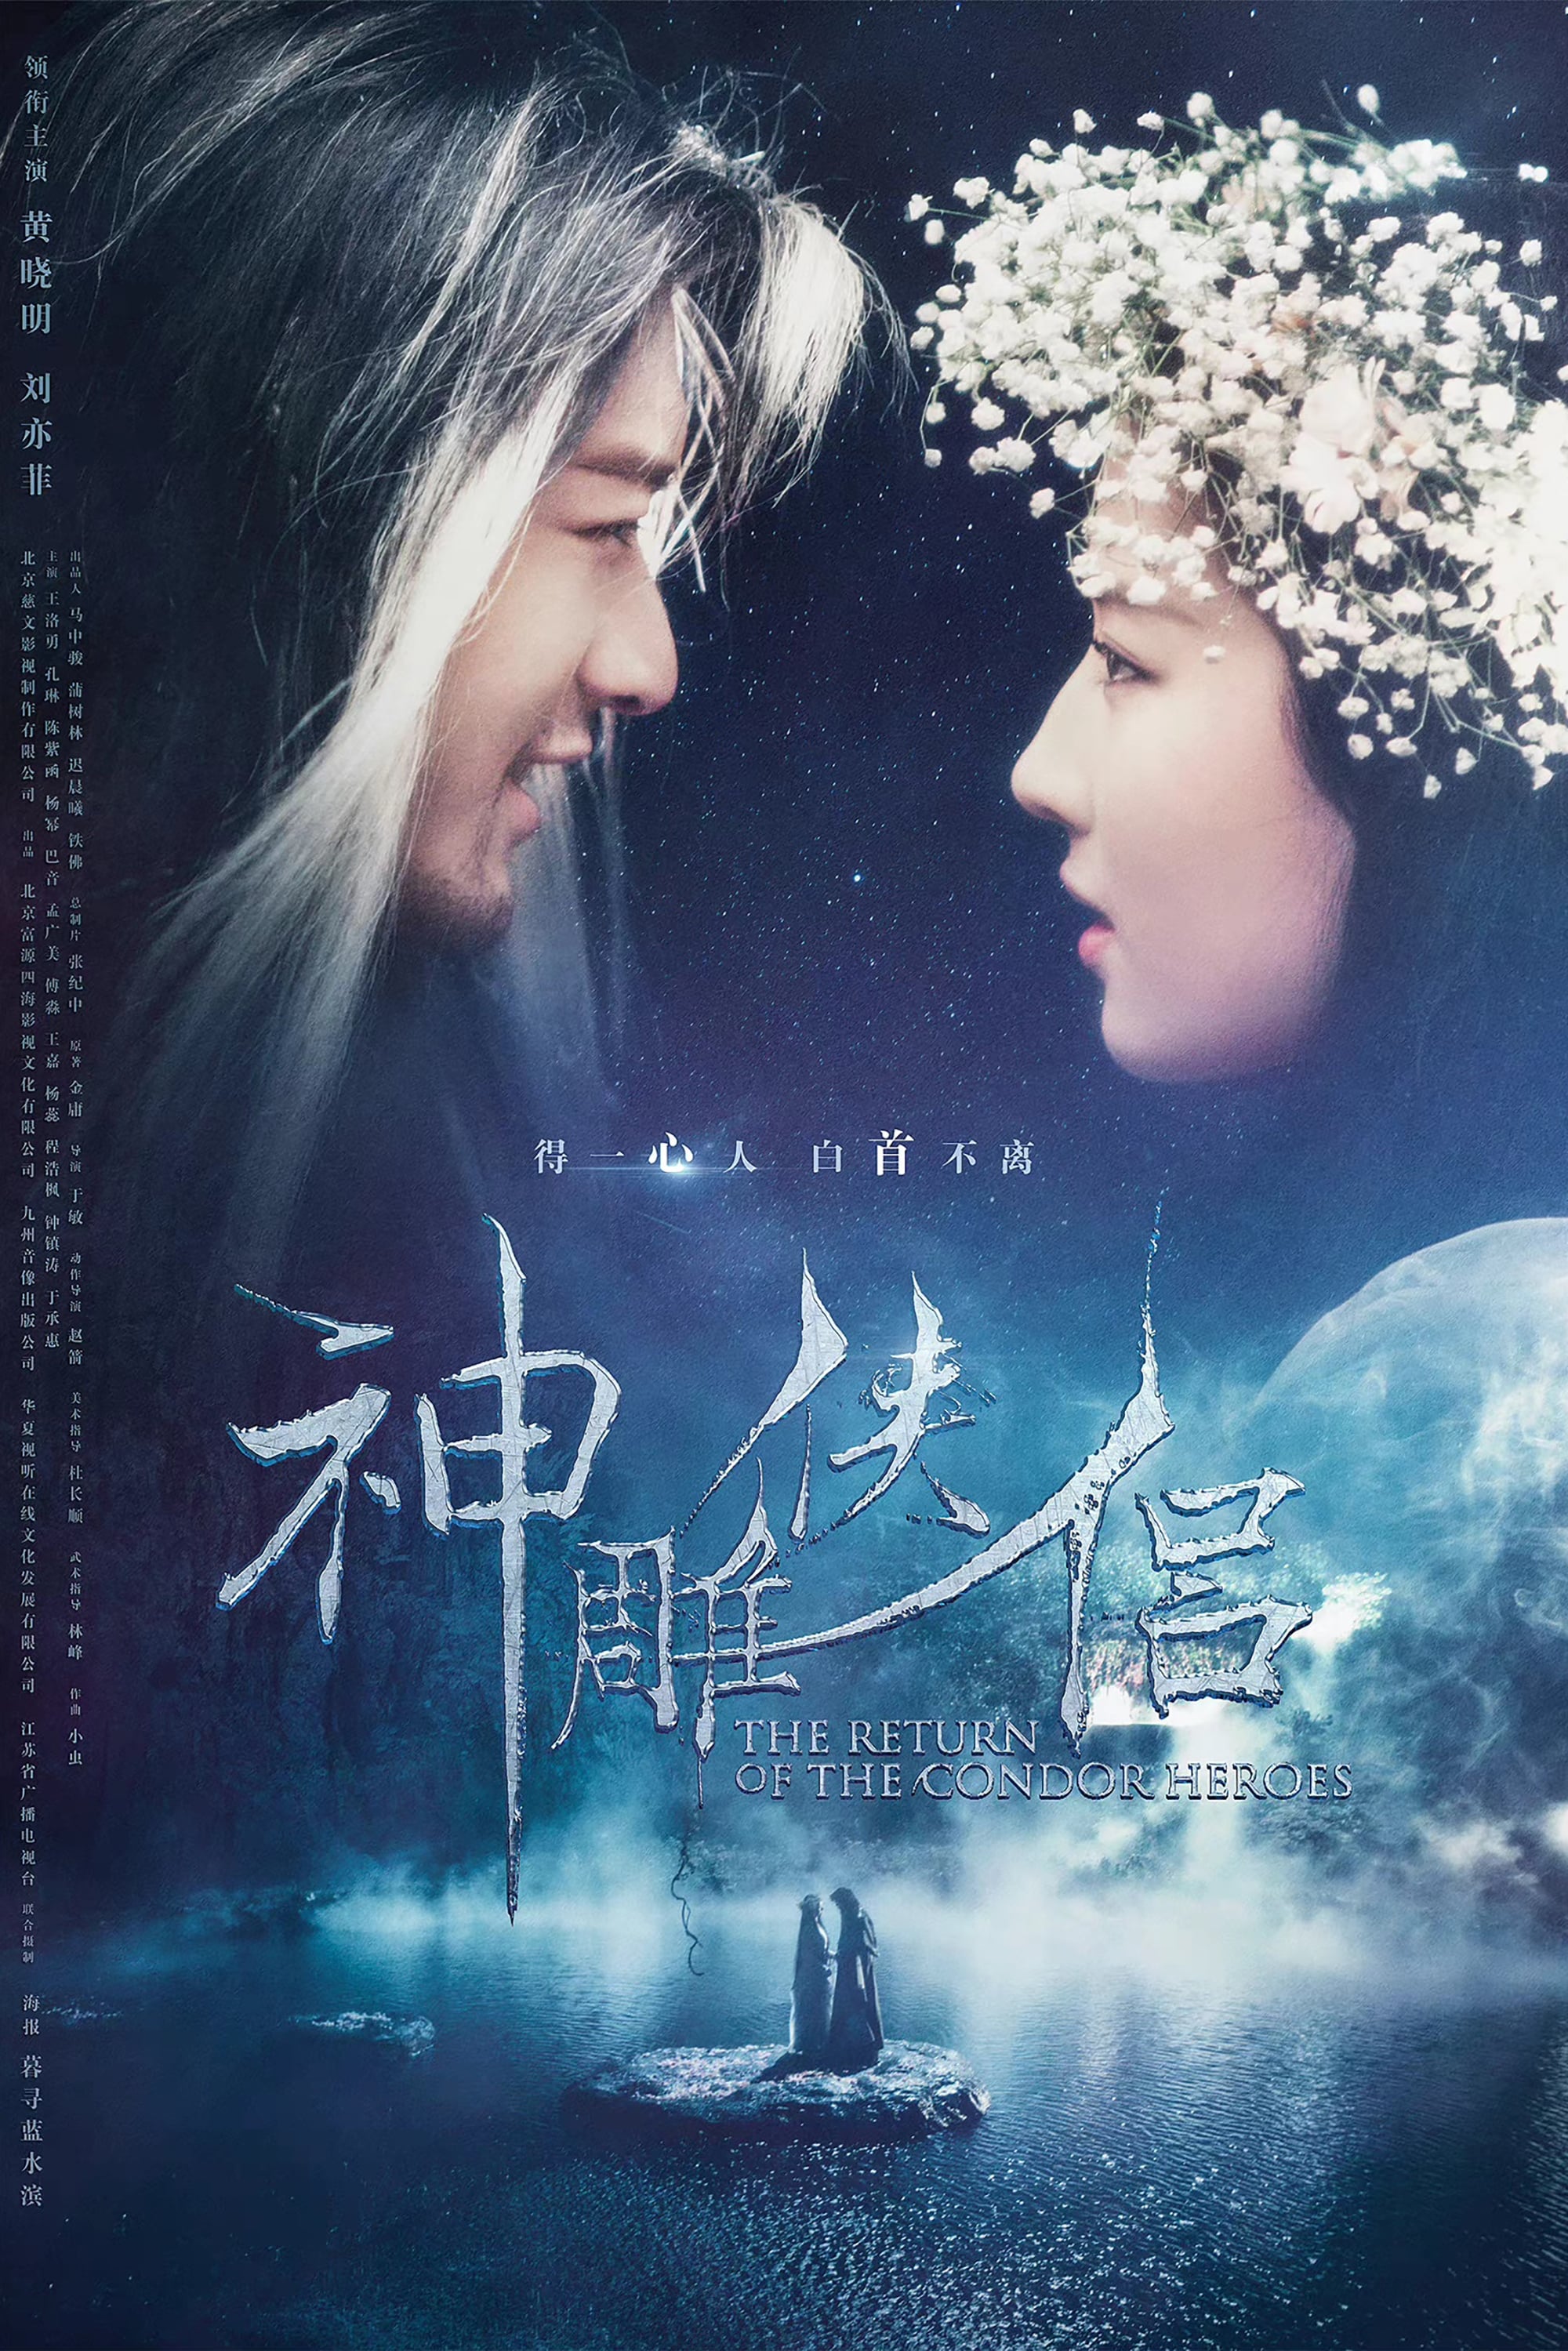 The Return of the Condor Heroes (2006)